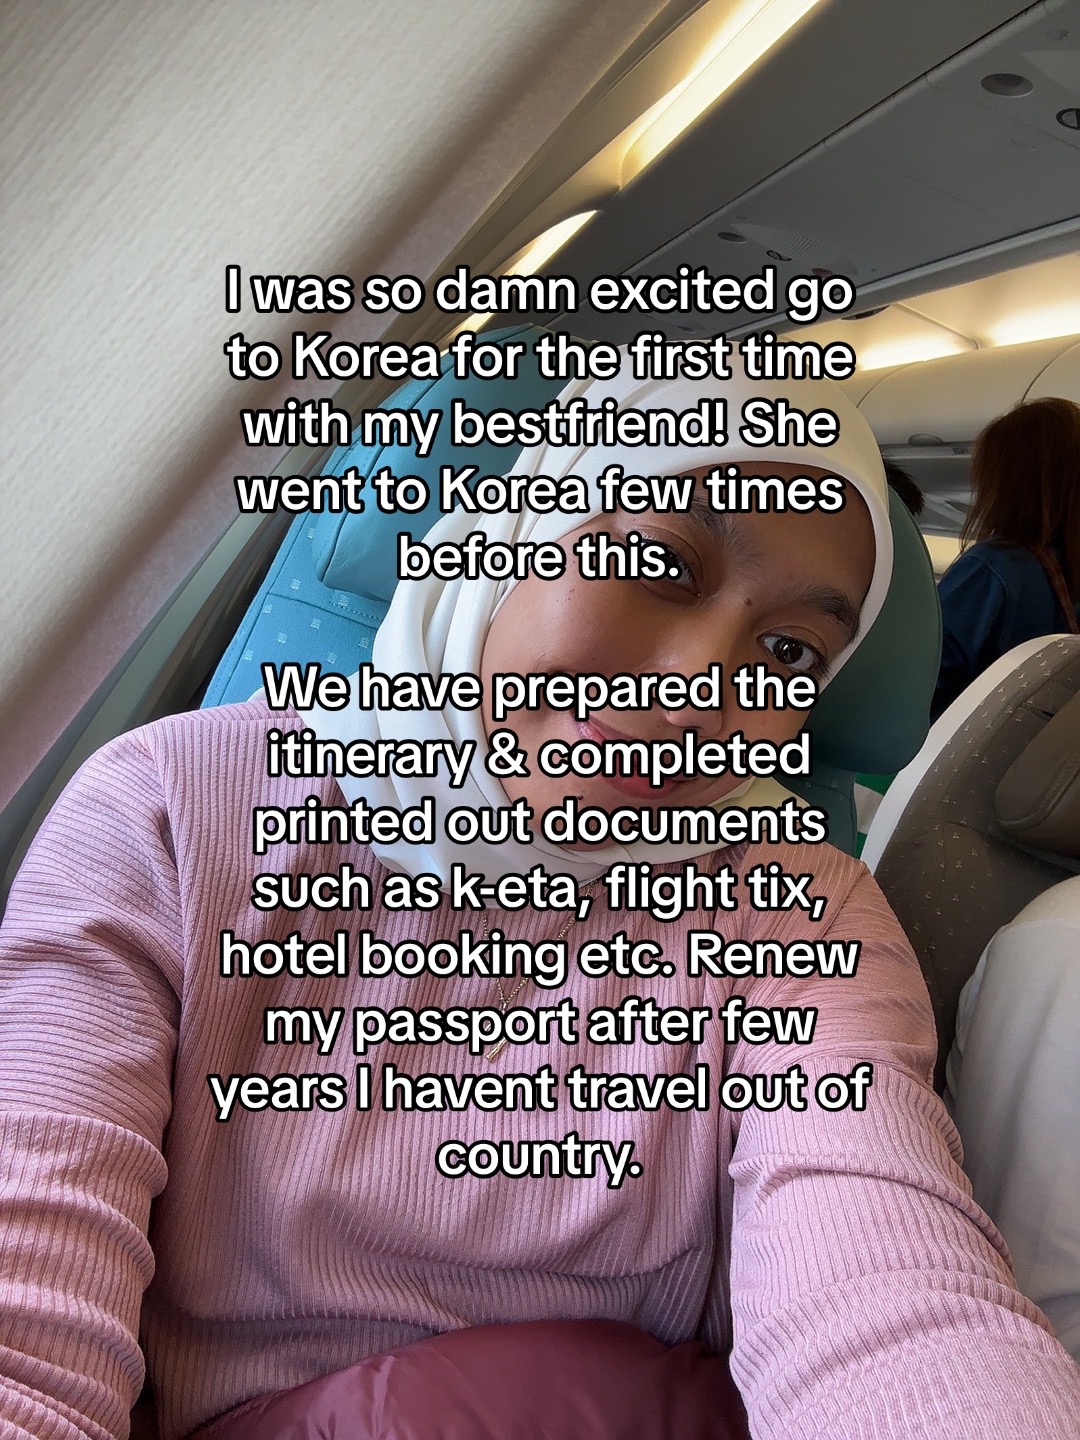 Malaysian woman sent back home from s. Korea for not ‘being prepared enough’ 